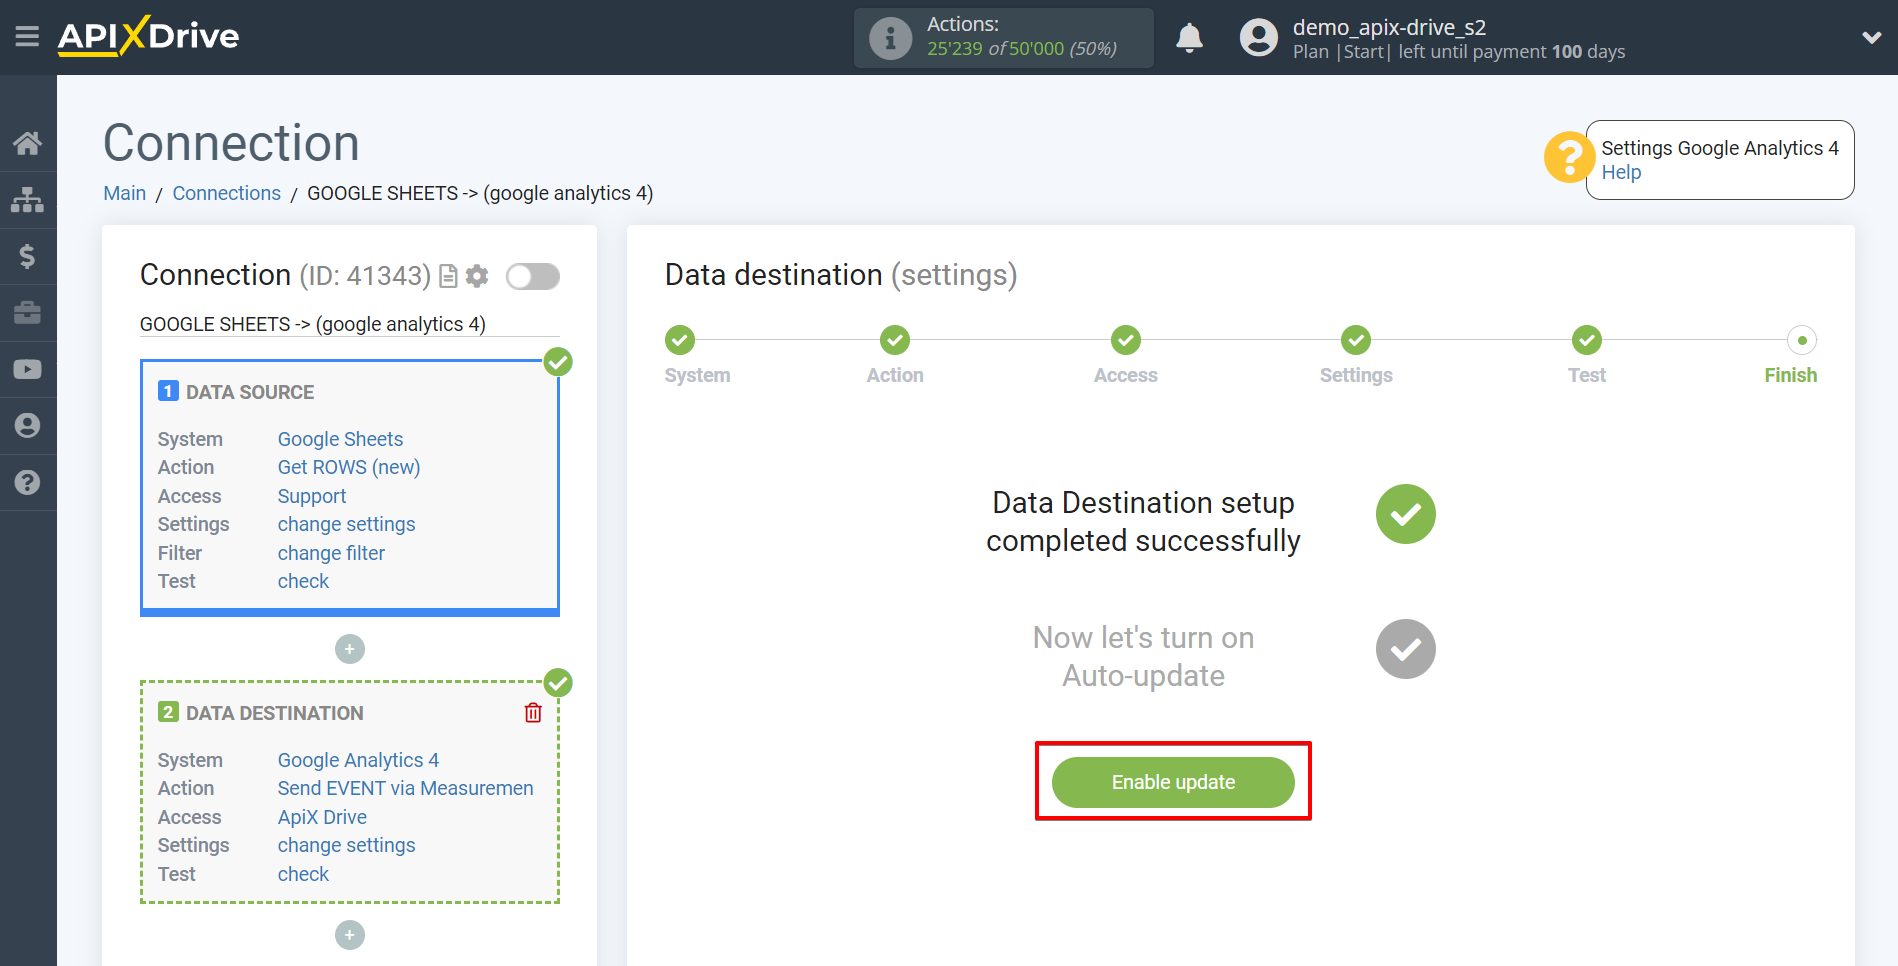 How to Connect Google Analytics 4 as Data Destination | Enable auto-update